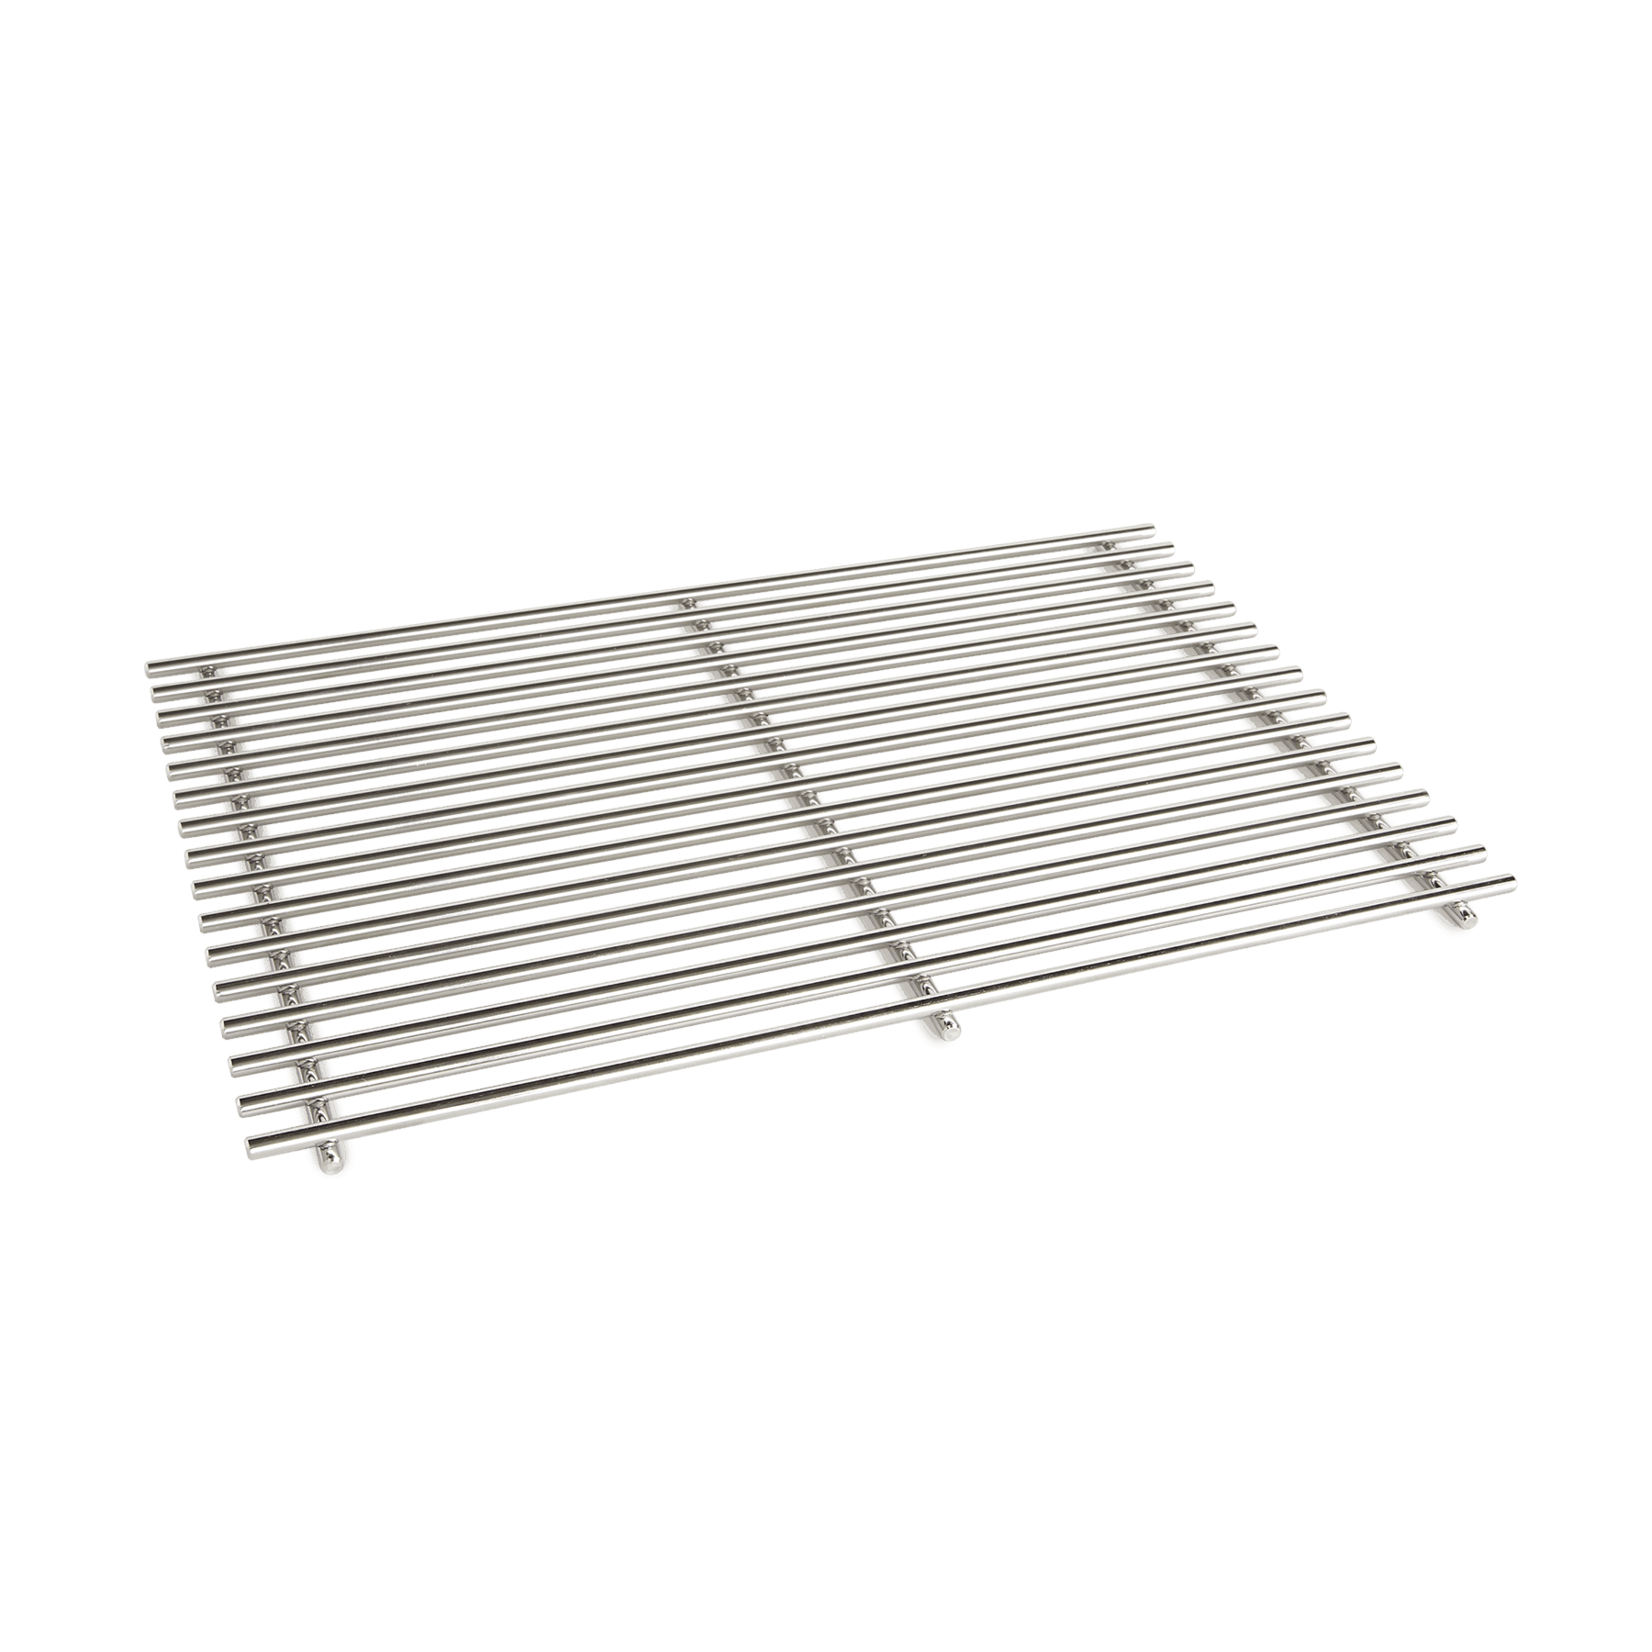 Weber Stainless Steel Cooking Grate (1) - Fits SmokeFire EX4 & EX6 and Spirit 300